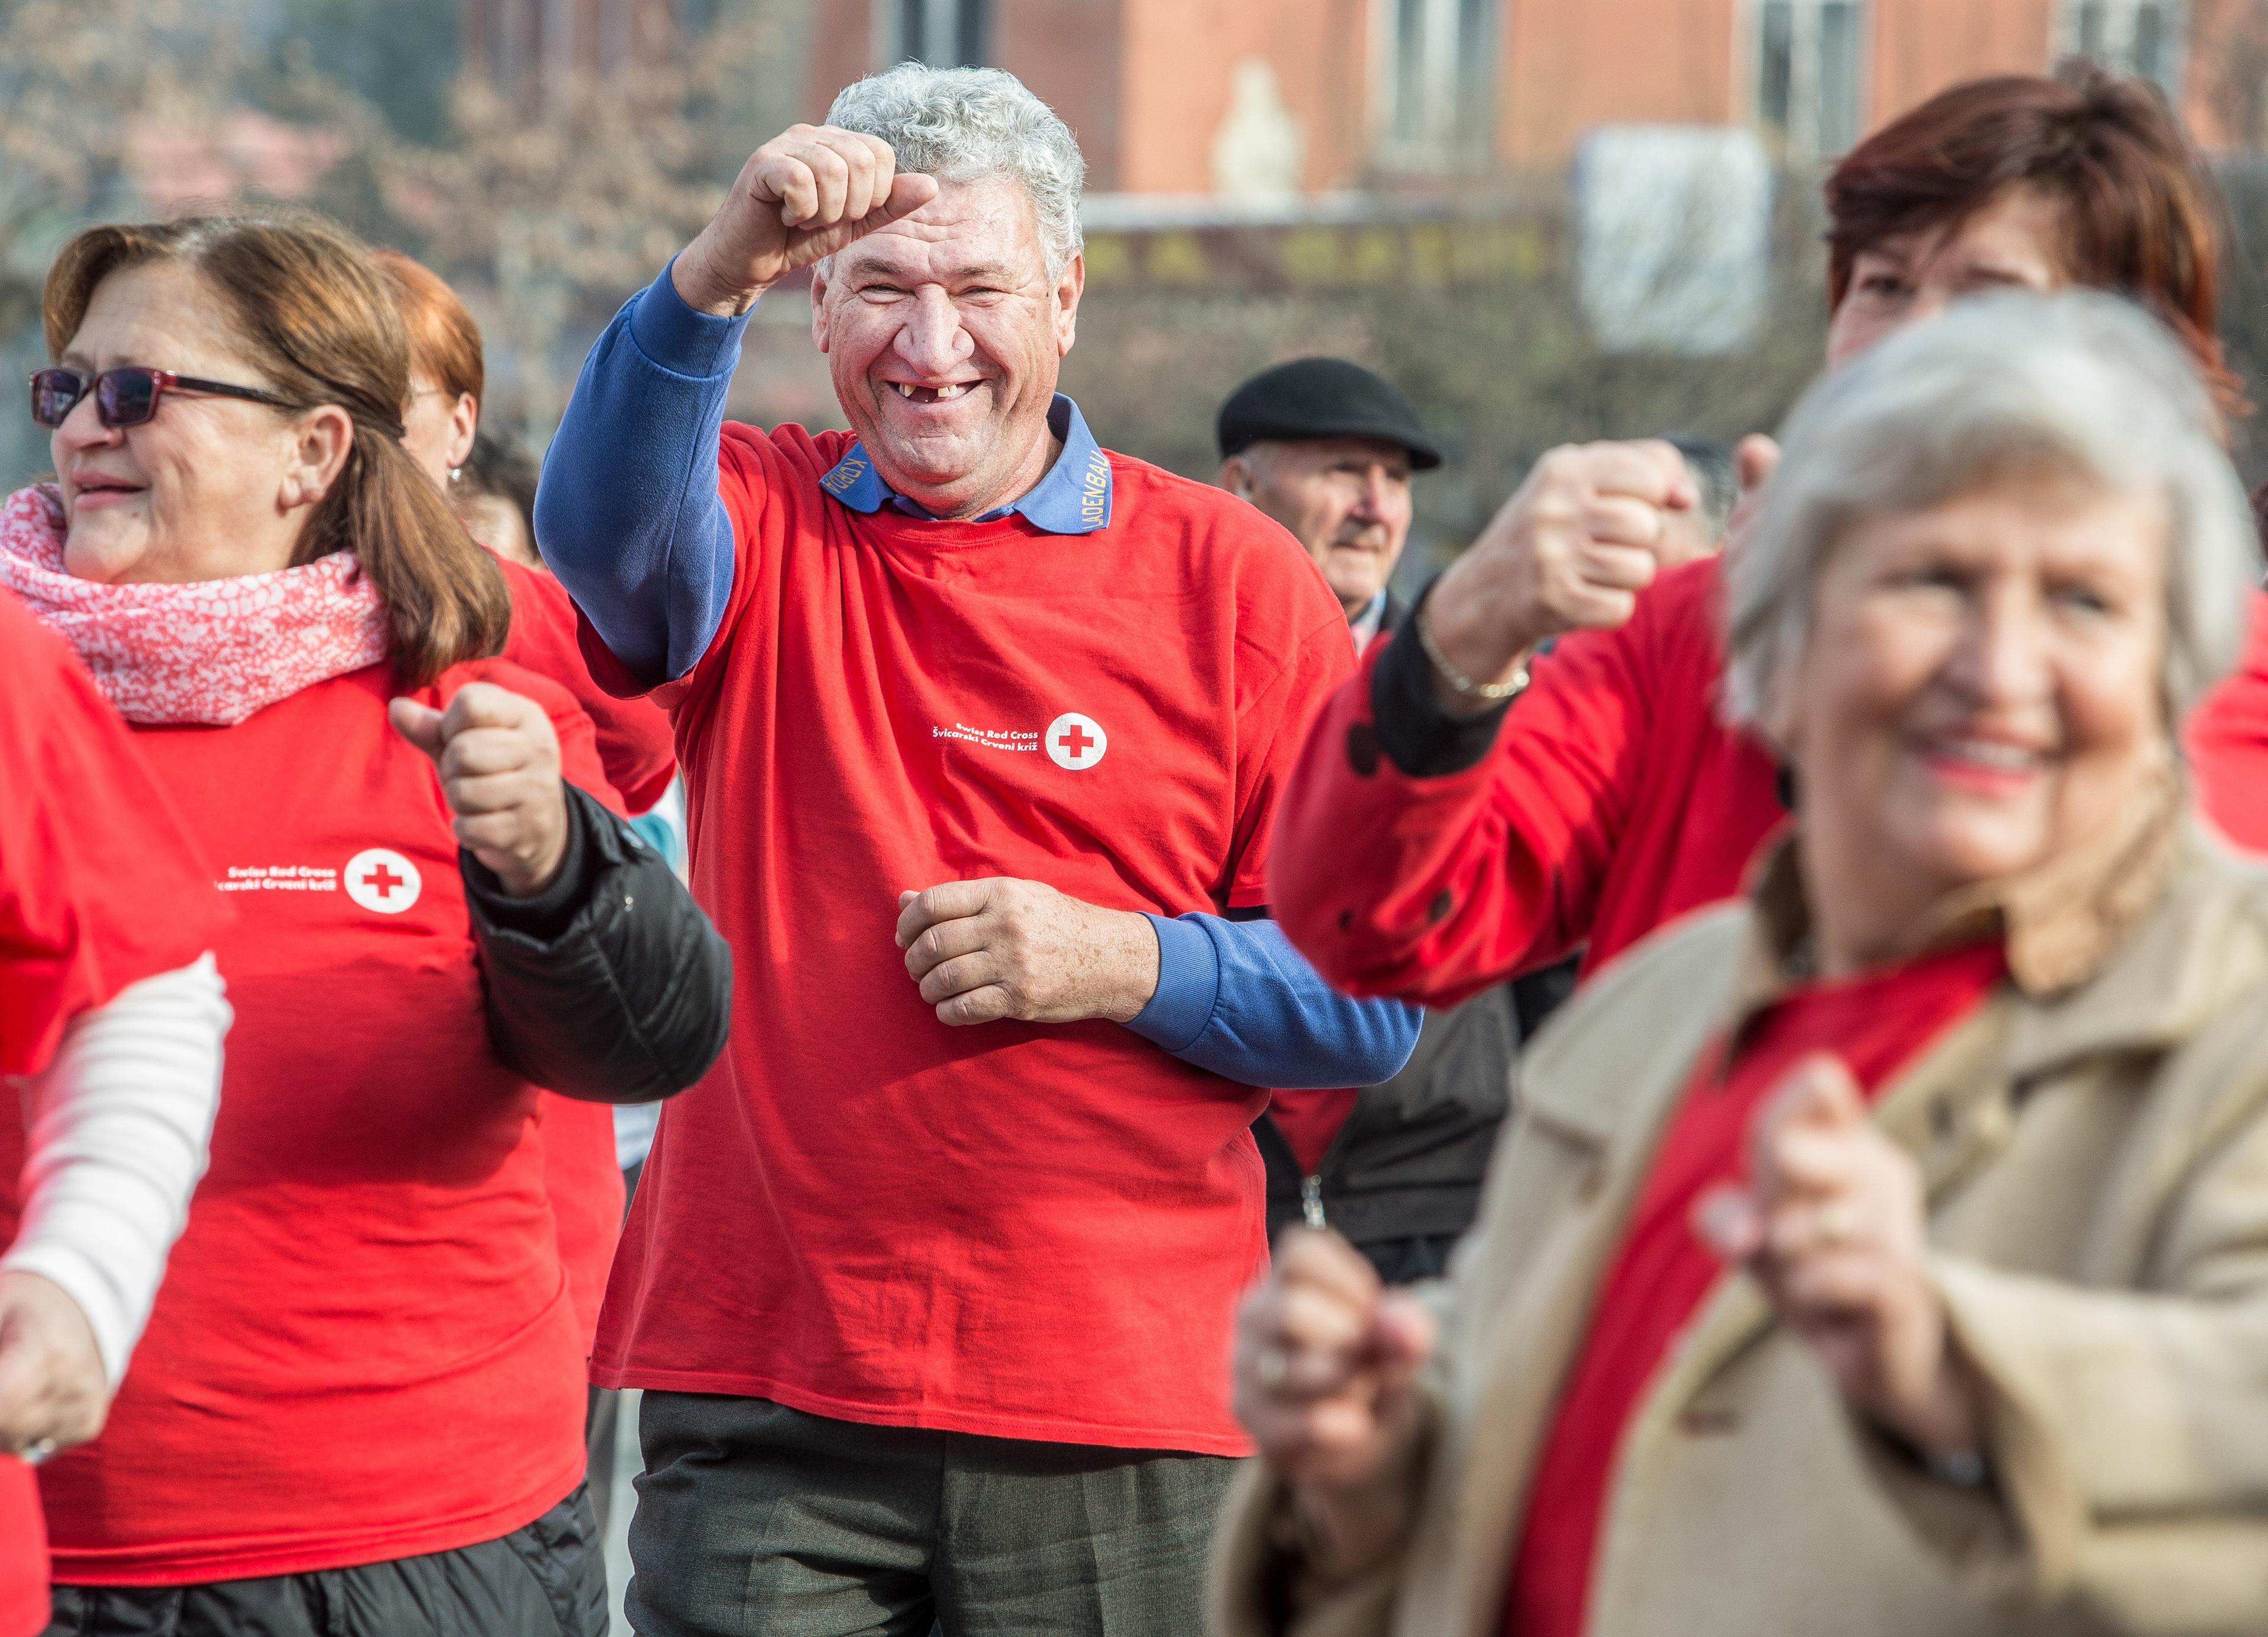 Older people exercising together. They are wearing Red Cross T-shirts and seem to be having fun.